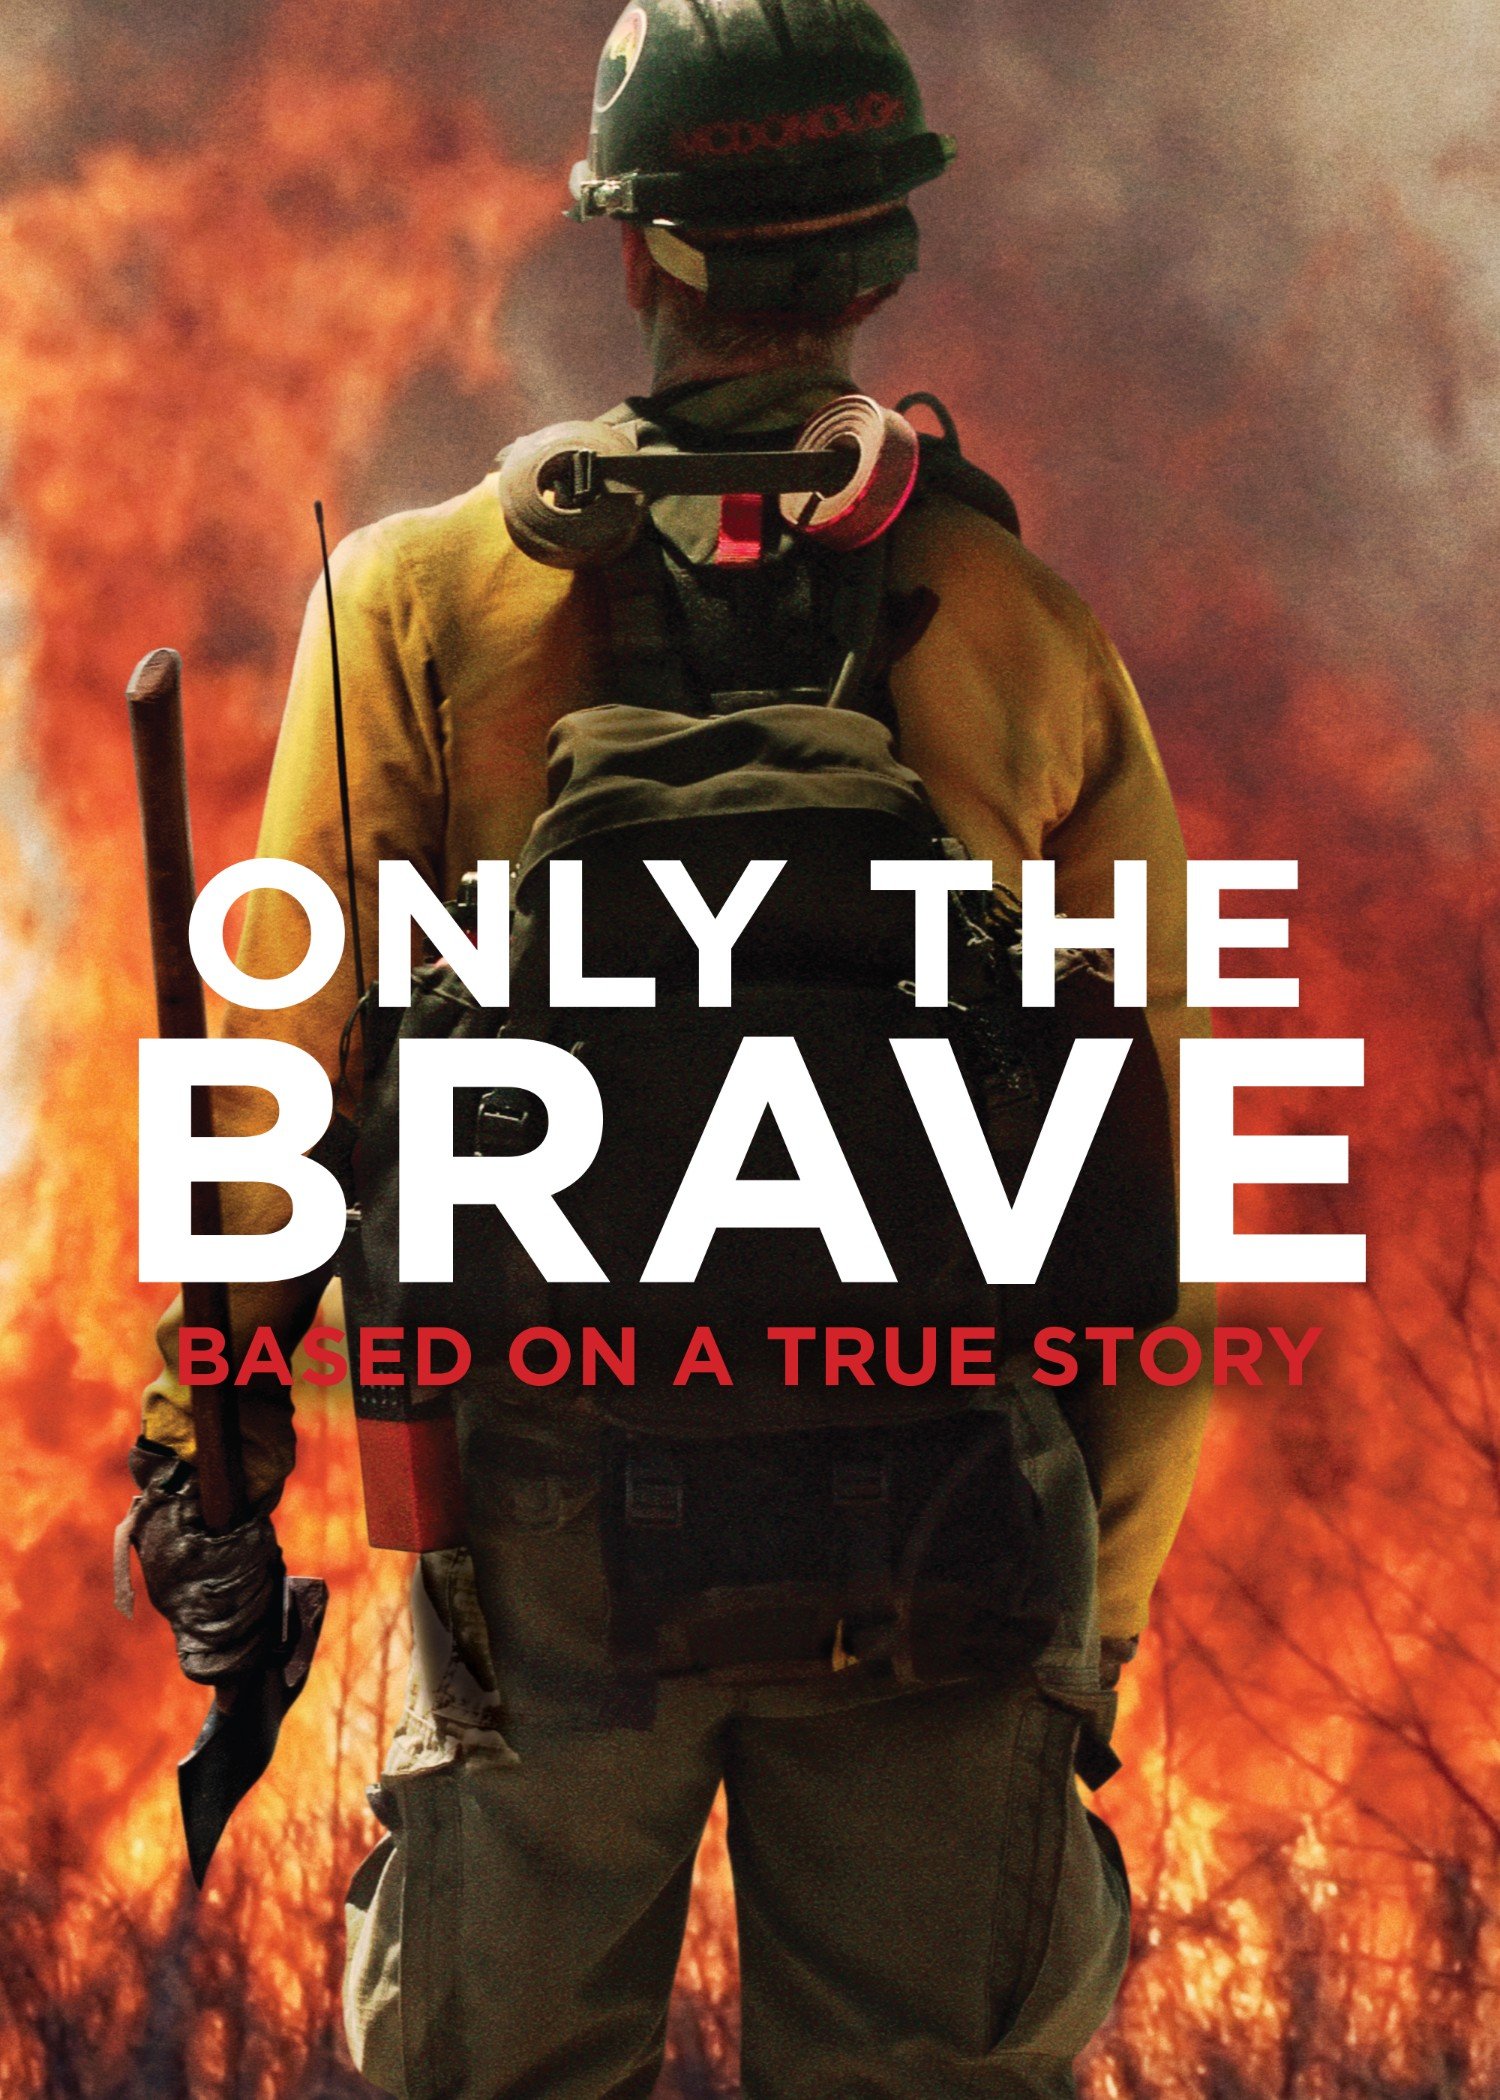 The Brave One - movie: watch streaming online